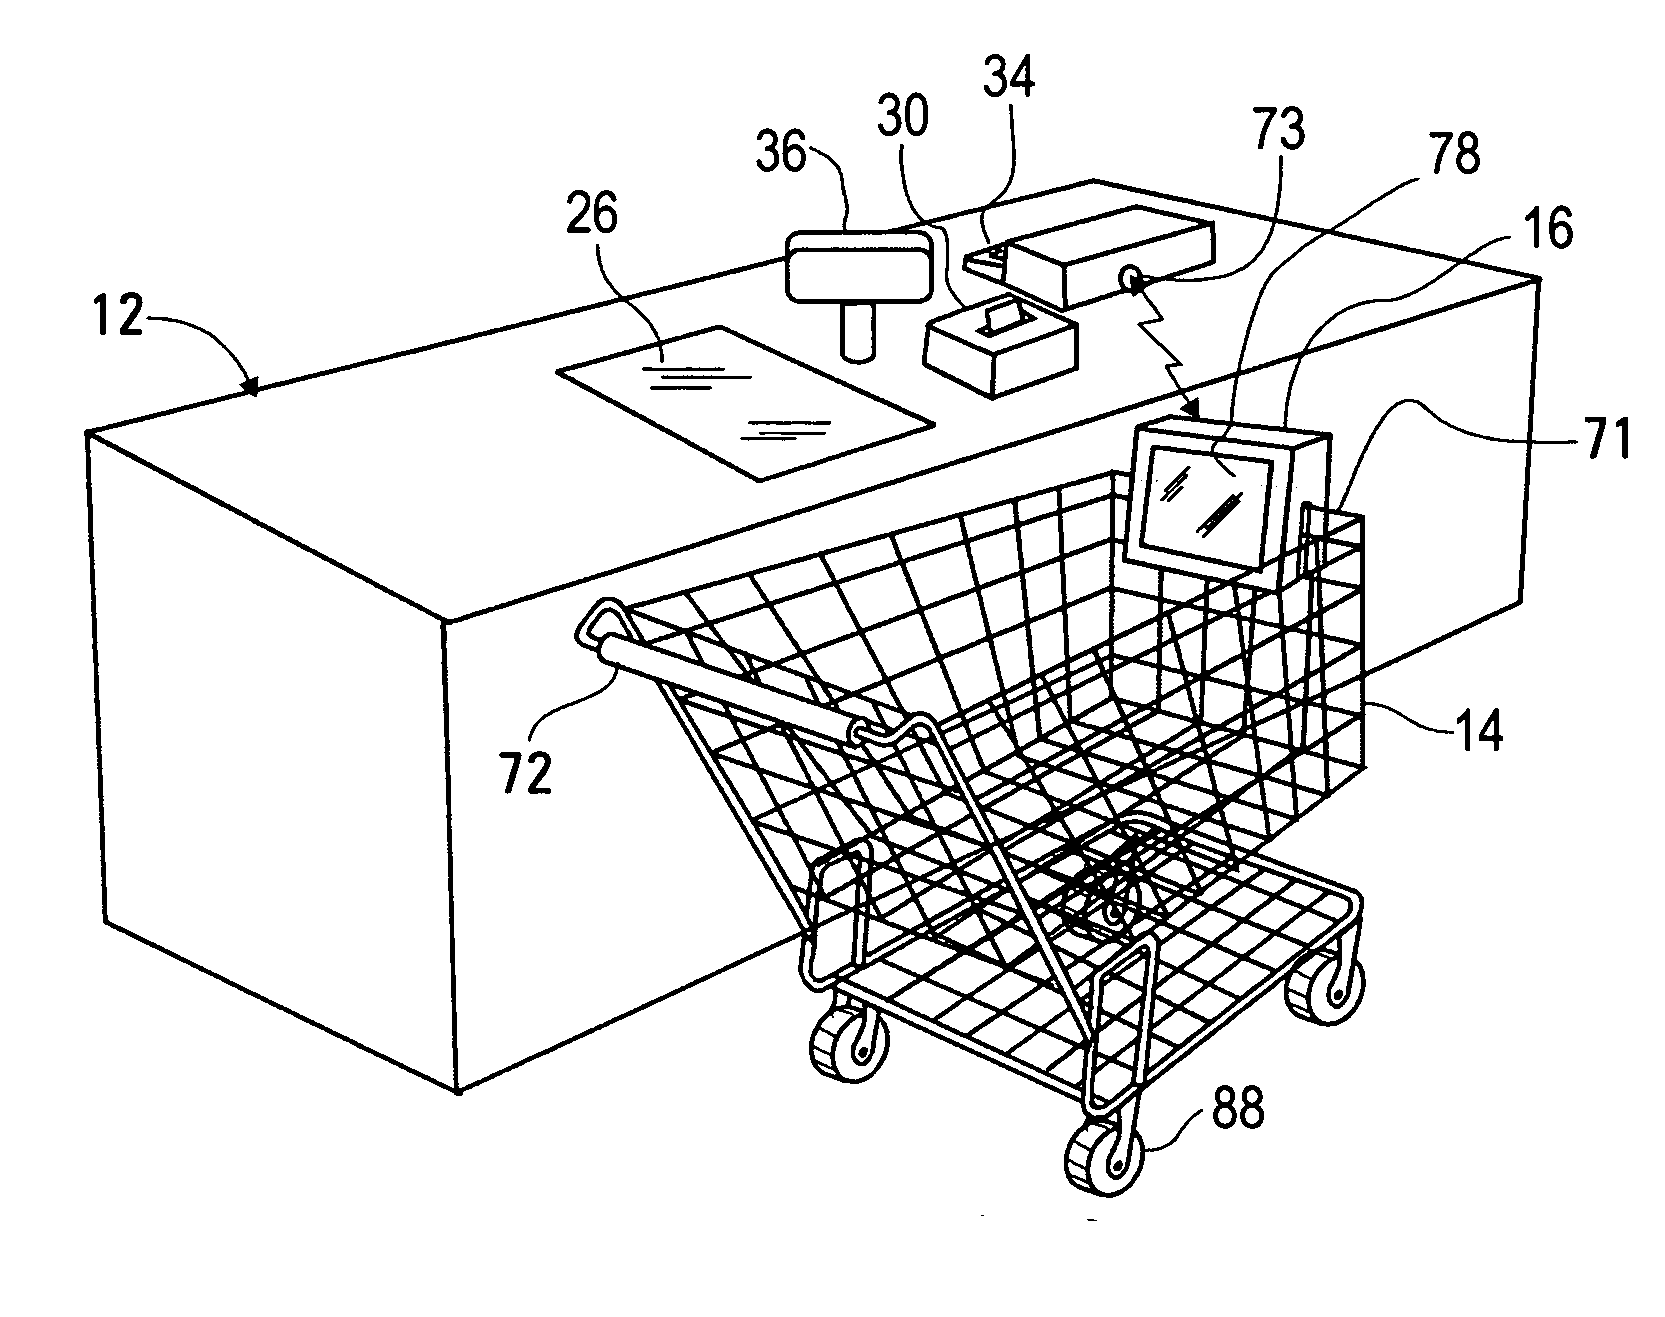 Method and system for measuring effectiveness of shopping cart advertisements based on purchases of advertised items